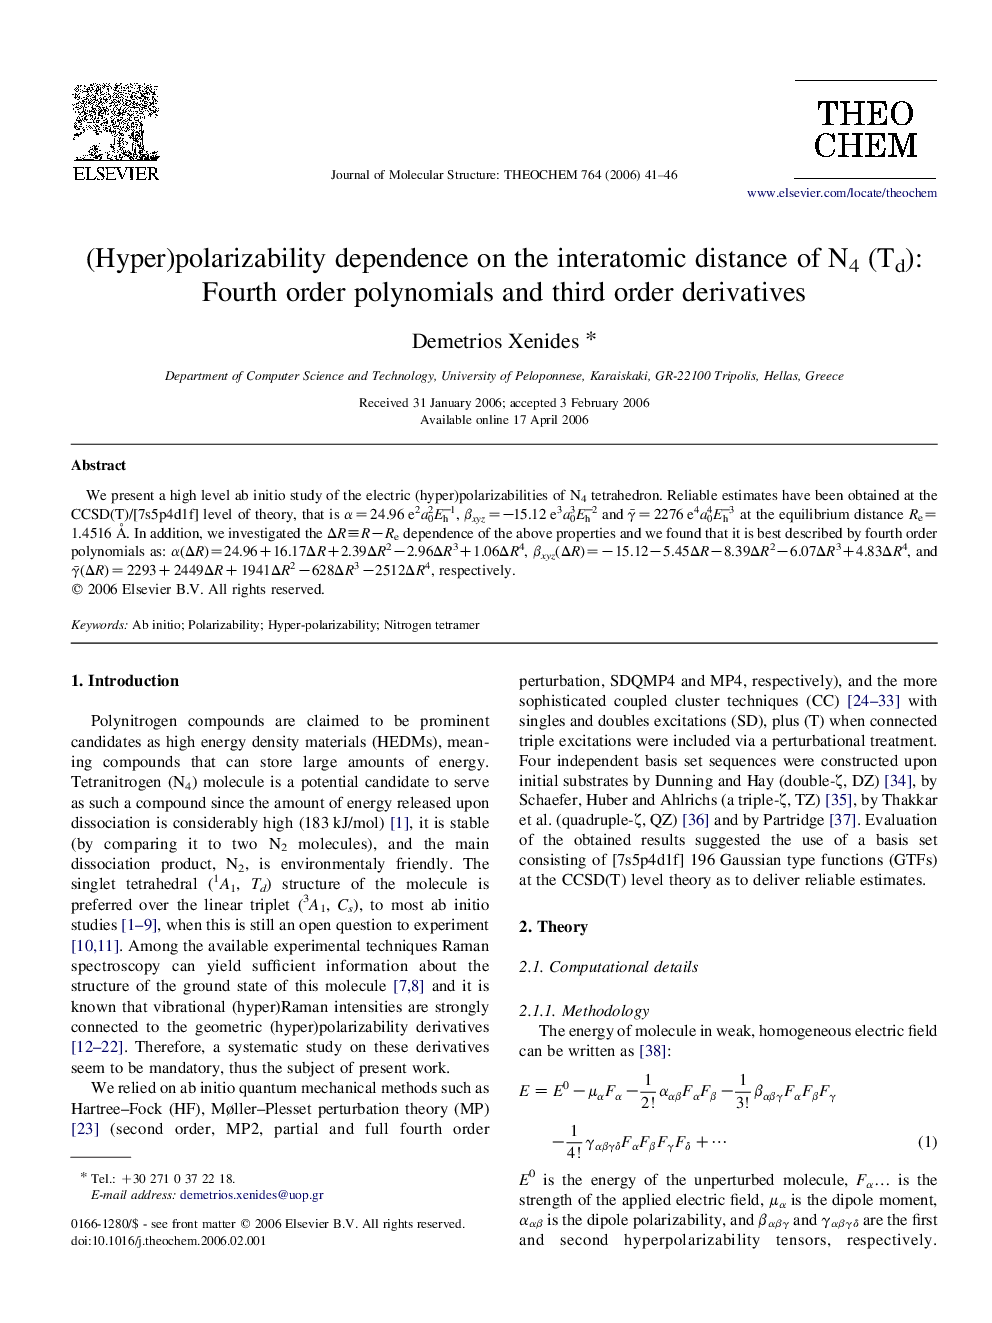 (Hyper)polarizability dependence on the interatomic distance of N4 (Td): Fourth order polynomials and third order derivatives